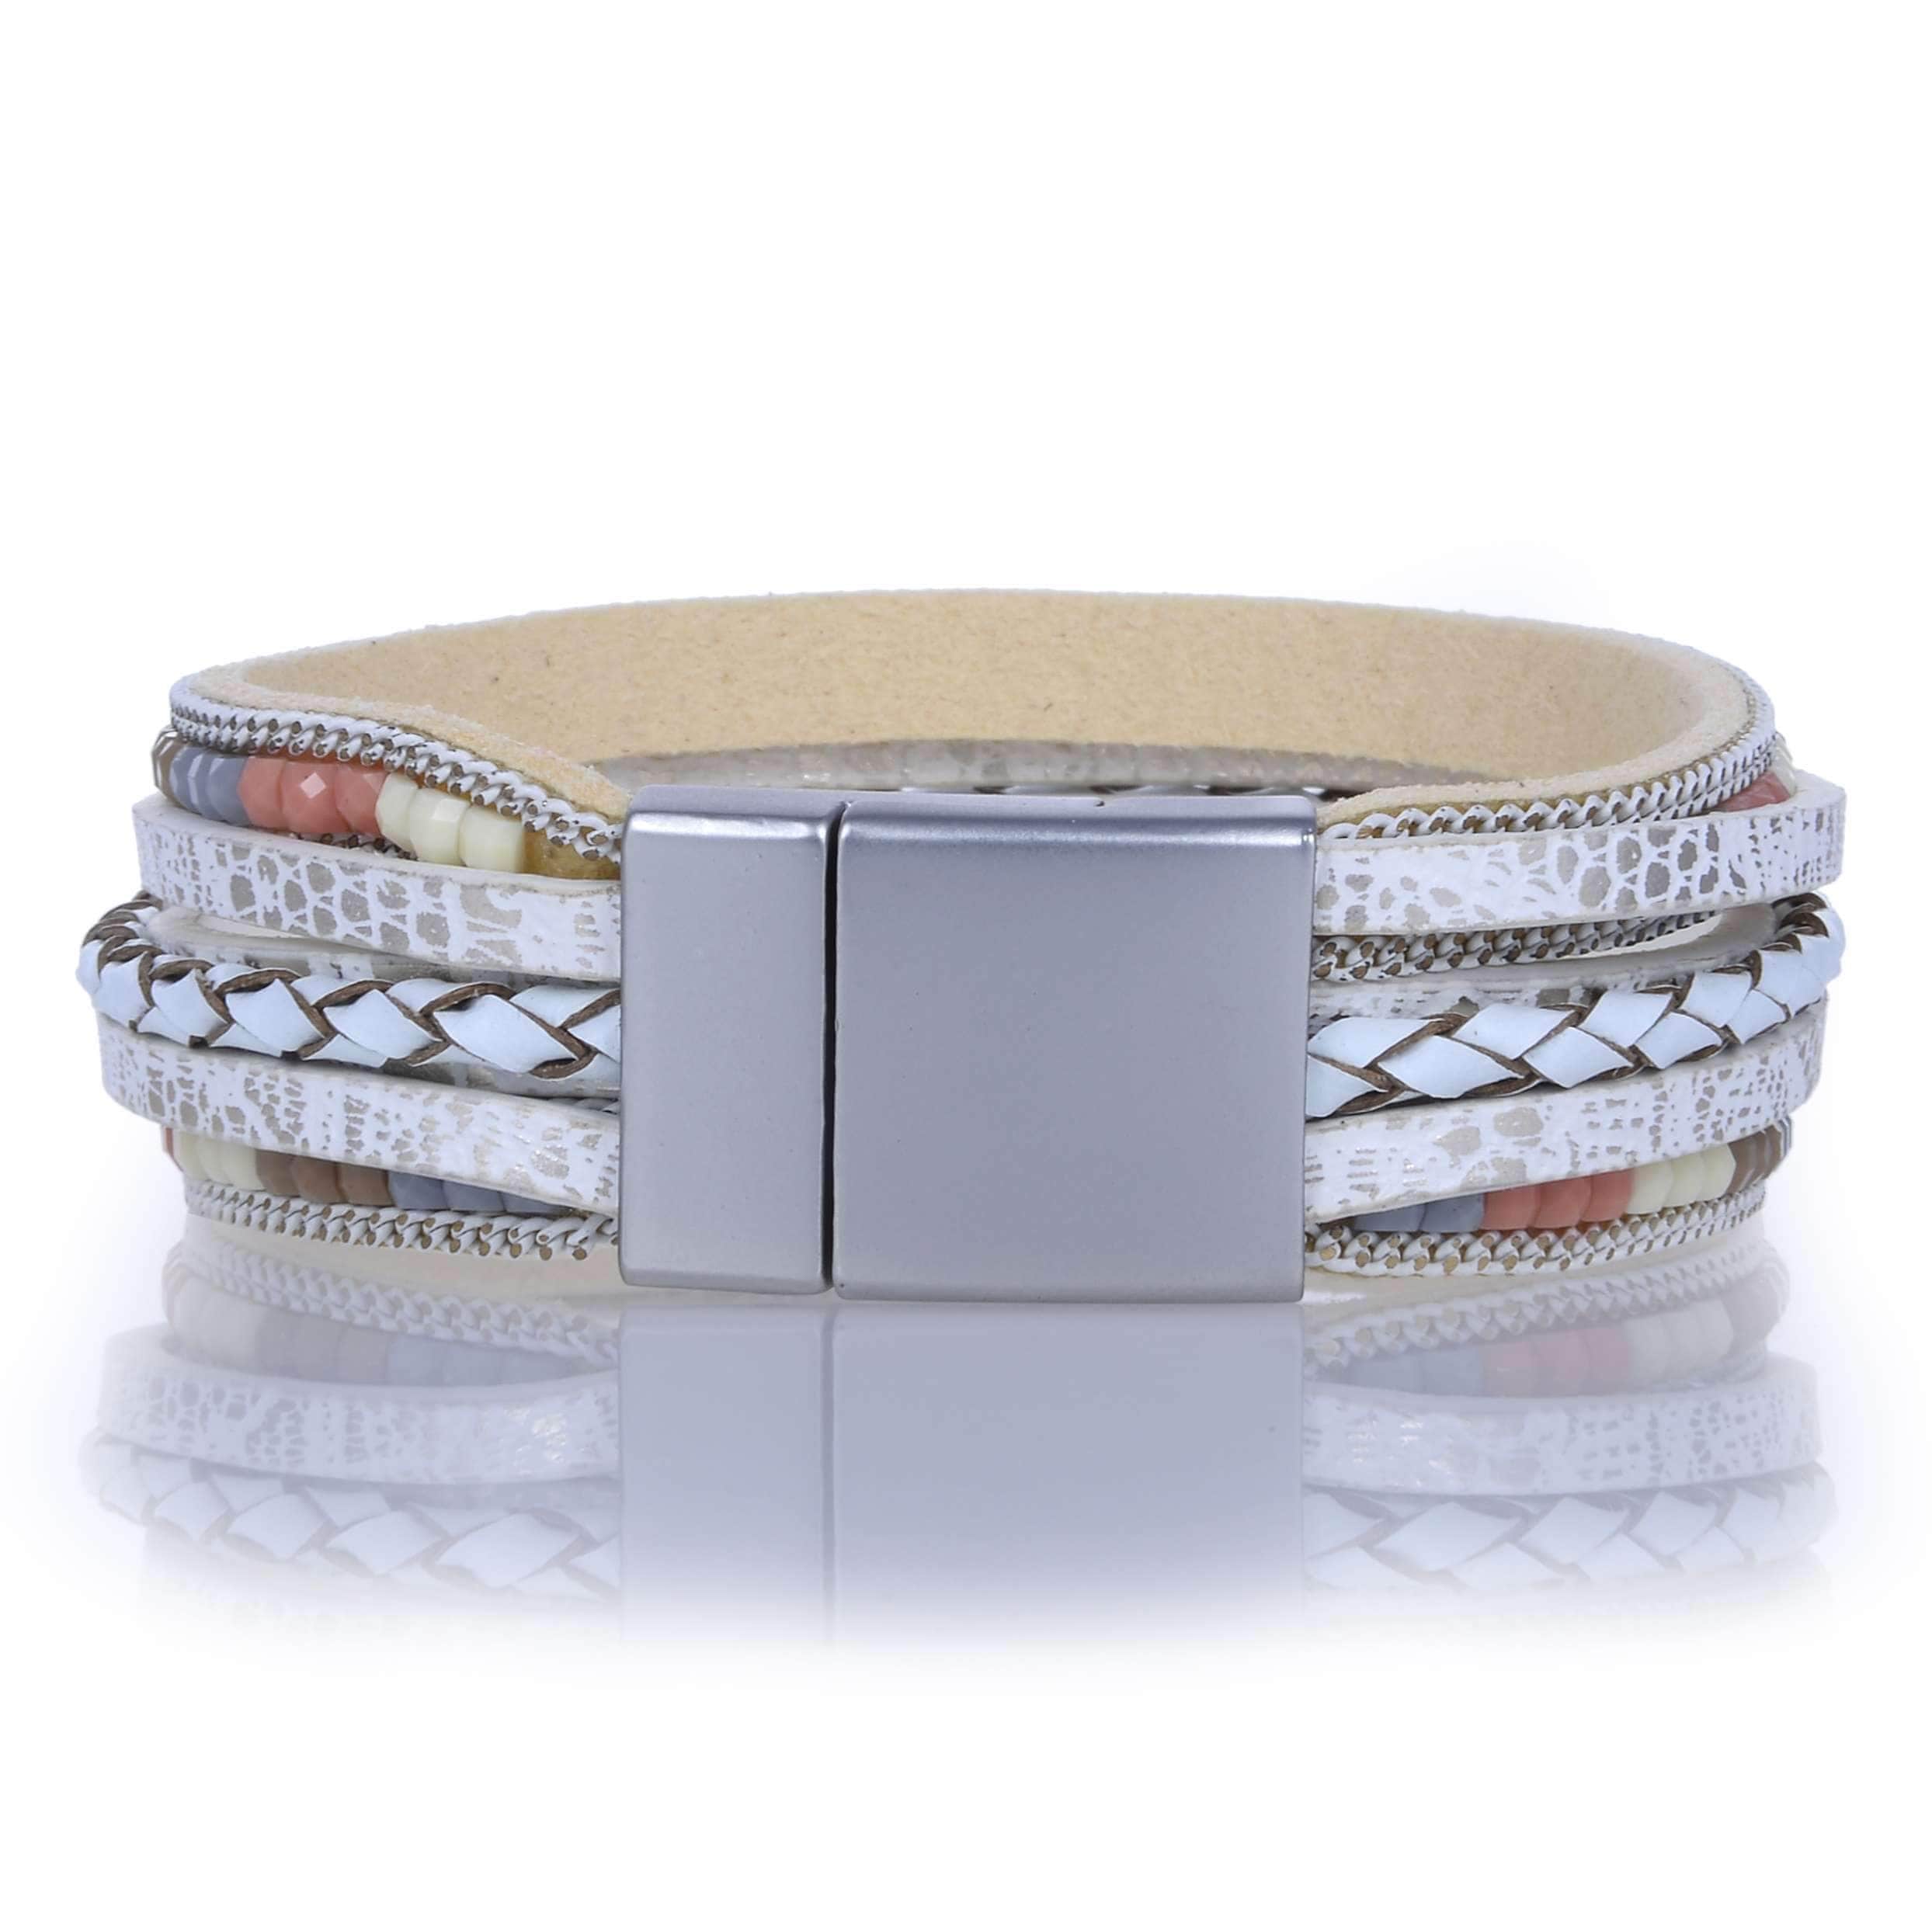 Kalifano Multiwrap Bracelets Multiple Layer Strand Bracelet Woven Leather White With Magnetic Clasp BMW-13-WE